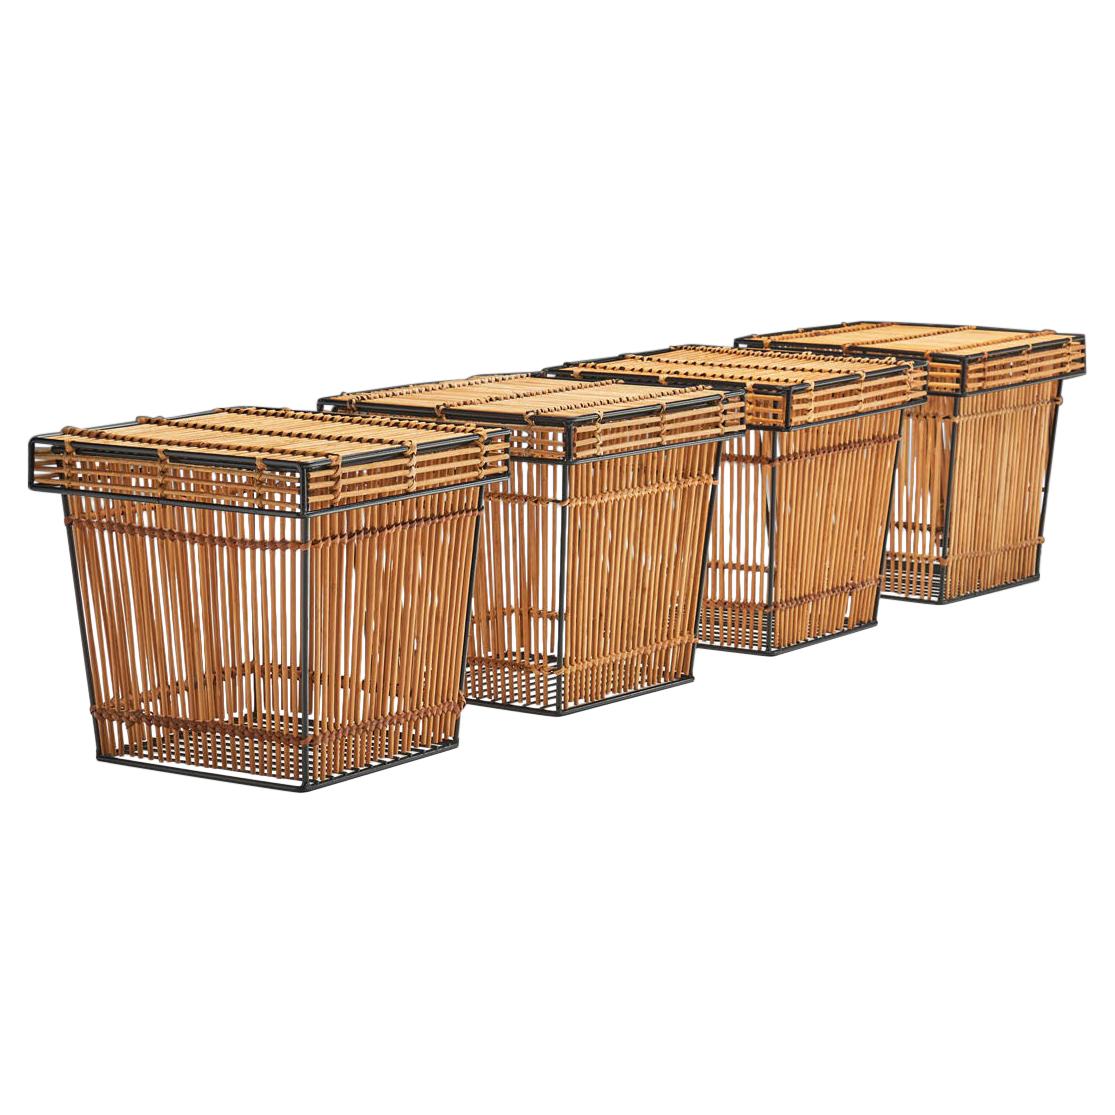 These rattan and steel baskets are attributed to Dutch designer, Dirk van Sliedregt, and were manufactured by Rohé Noordwolde in the 1960s.

Each Rohé basket has a metal structure covered in wicker. The organic material is carefully woven around the